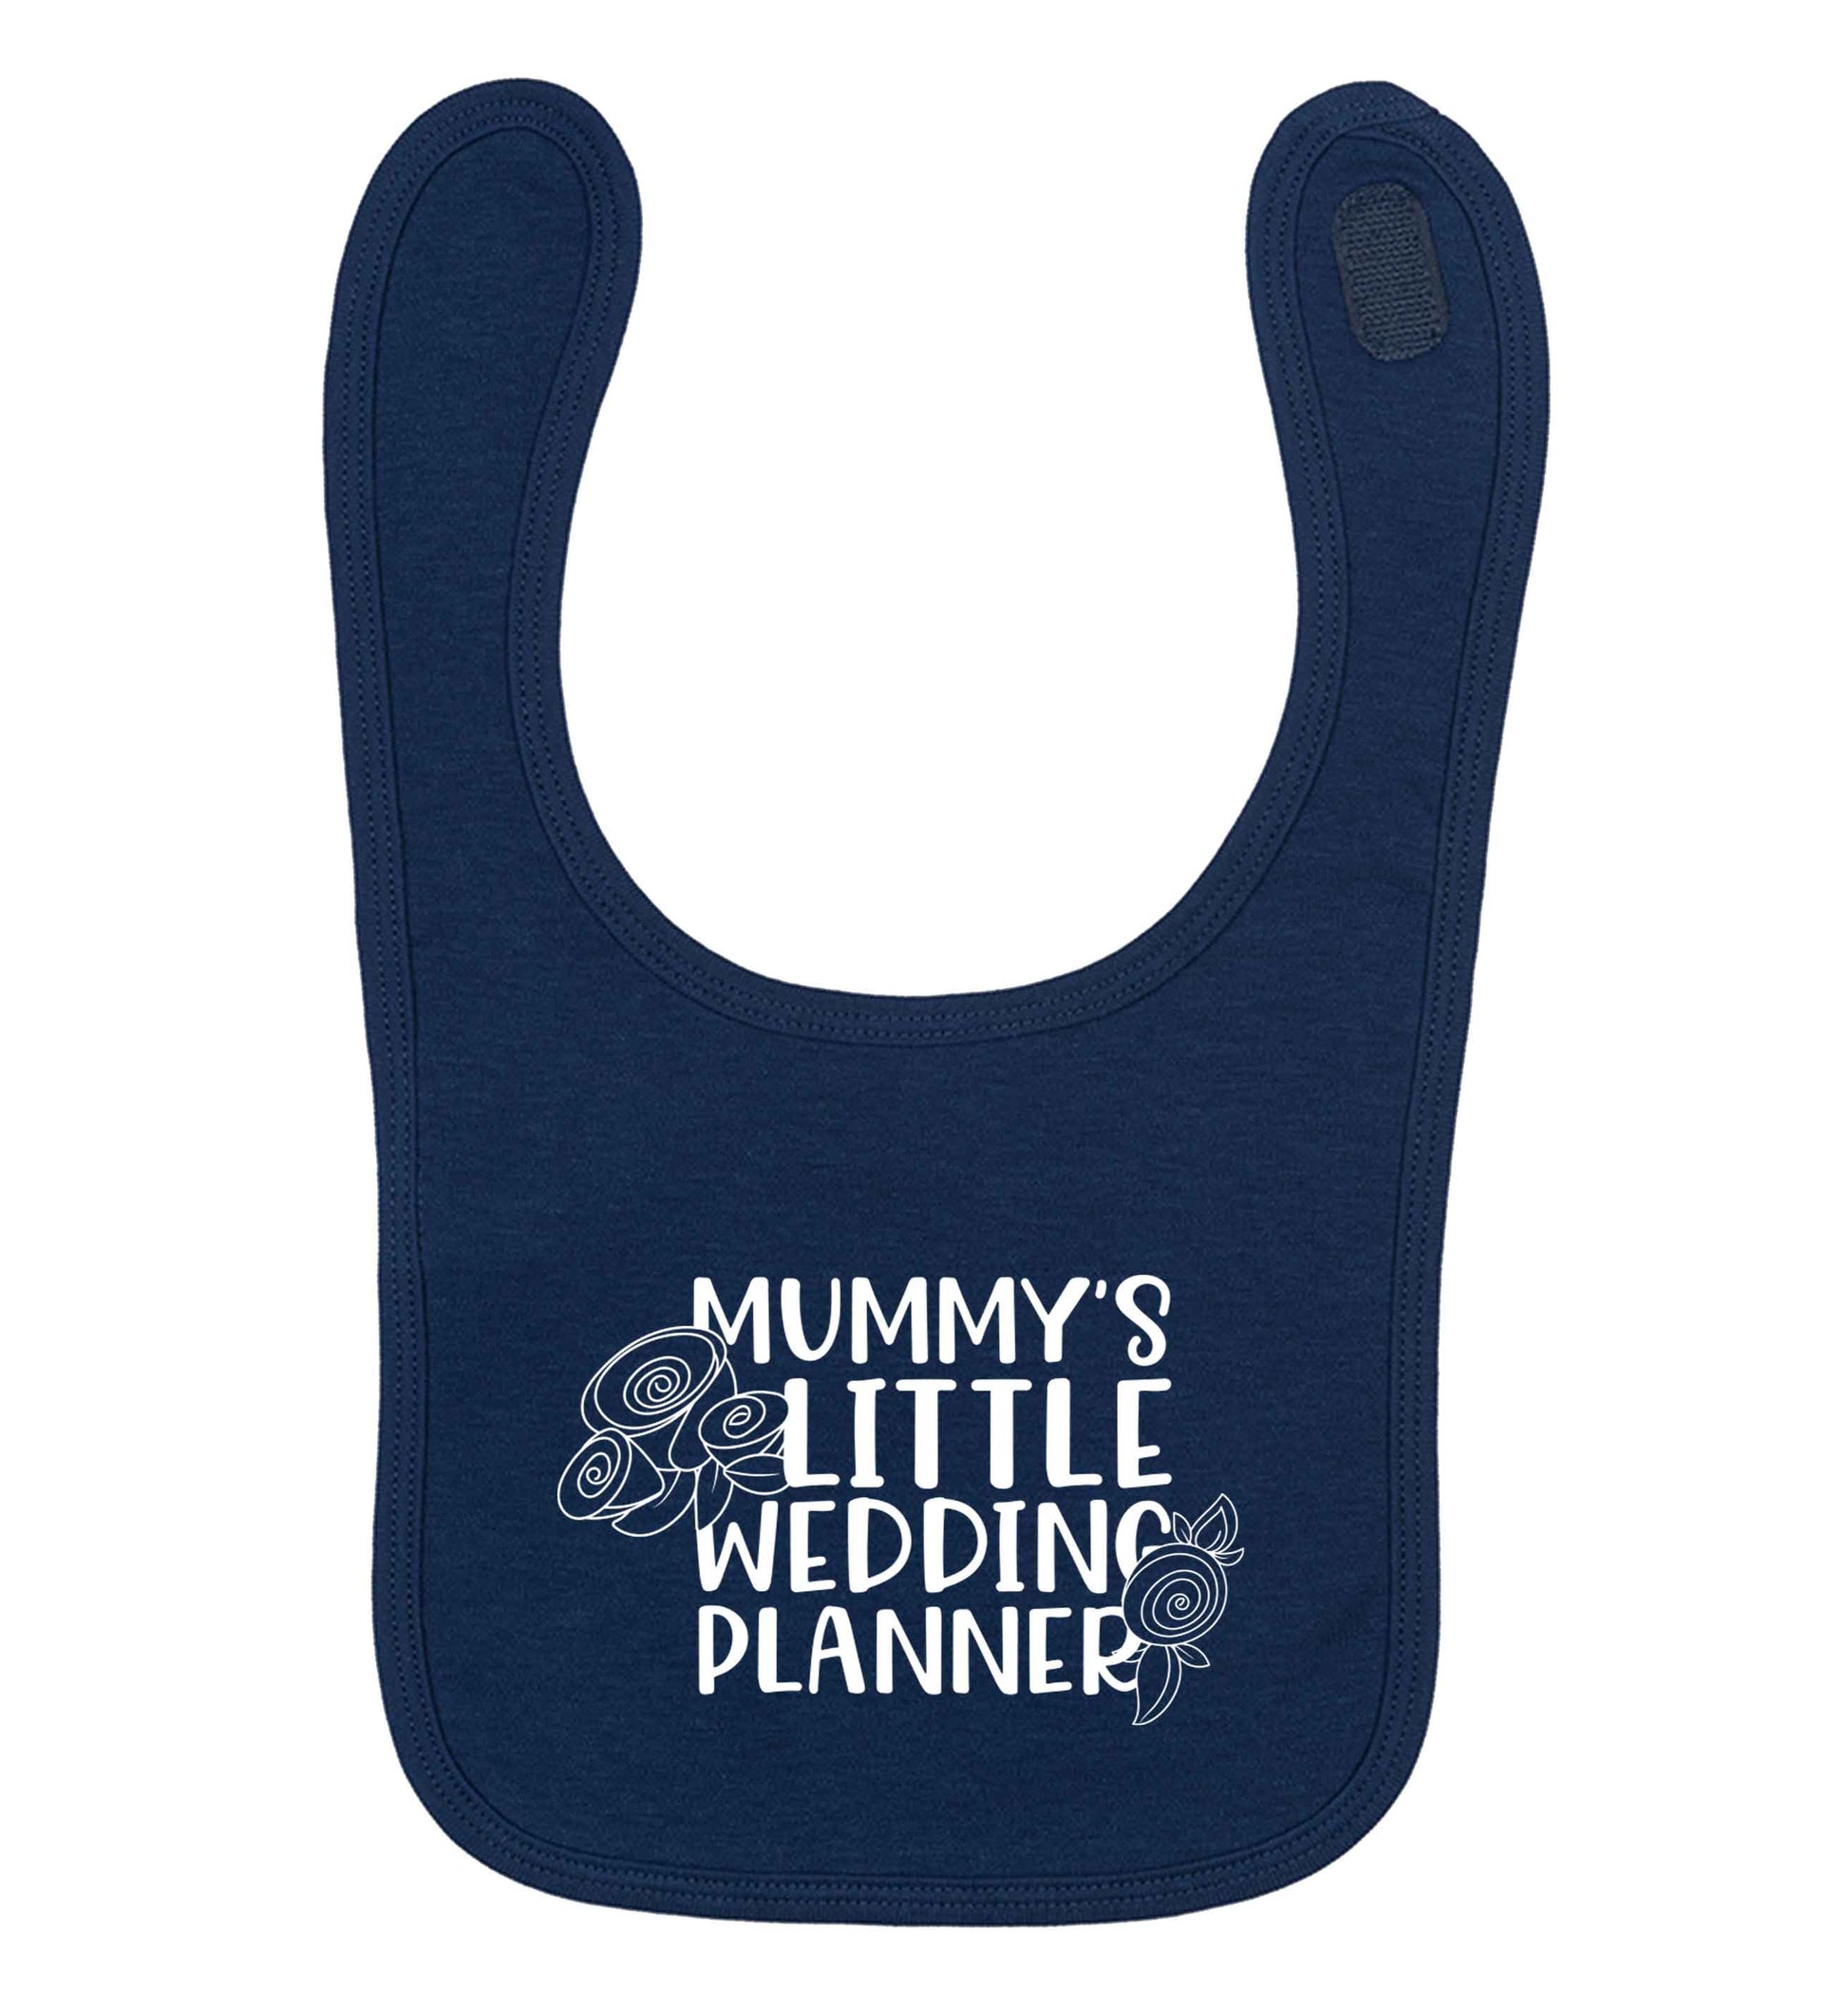 adorable wedding themed gifts for your mini wedding planner! navy baby bib